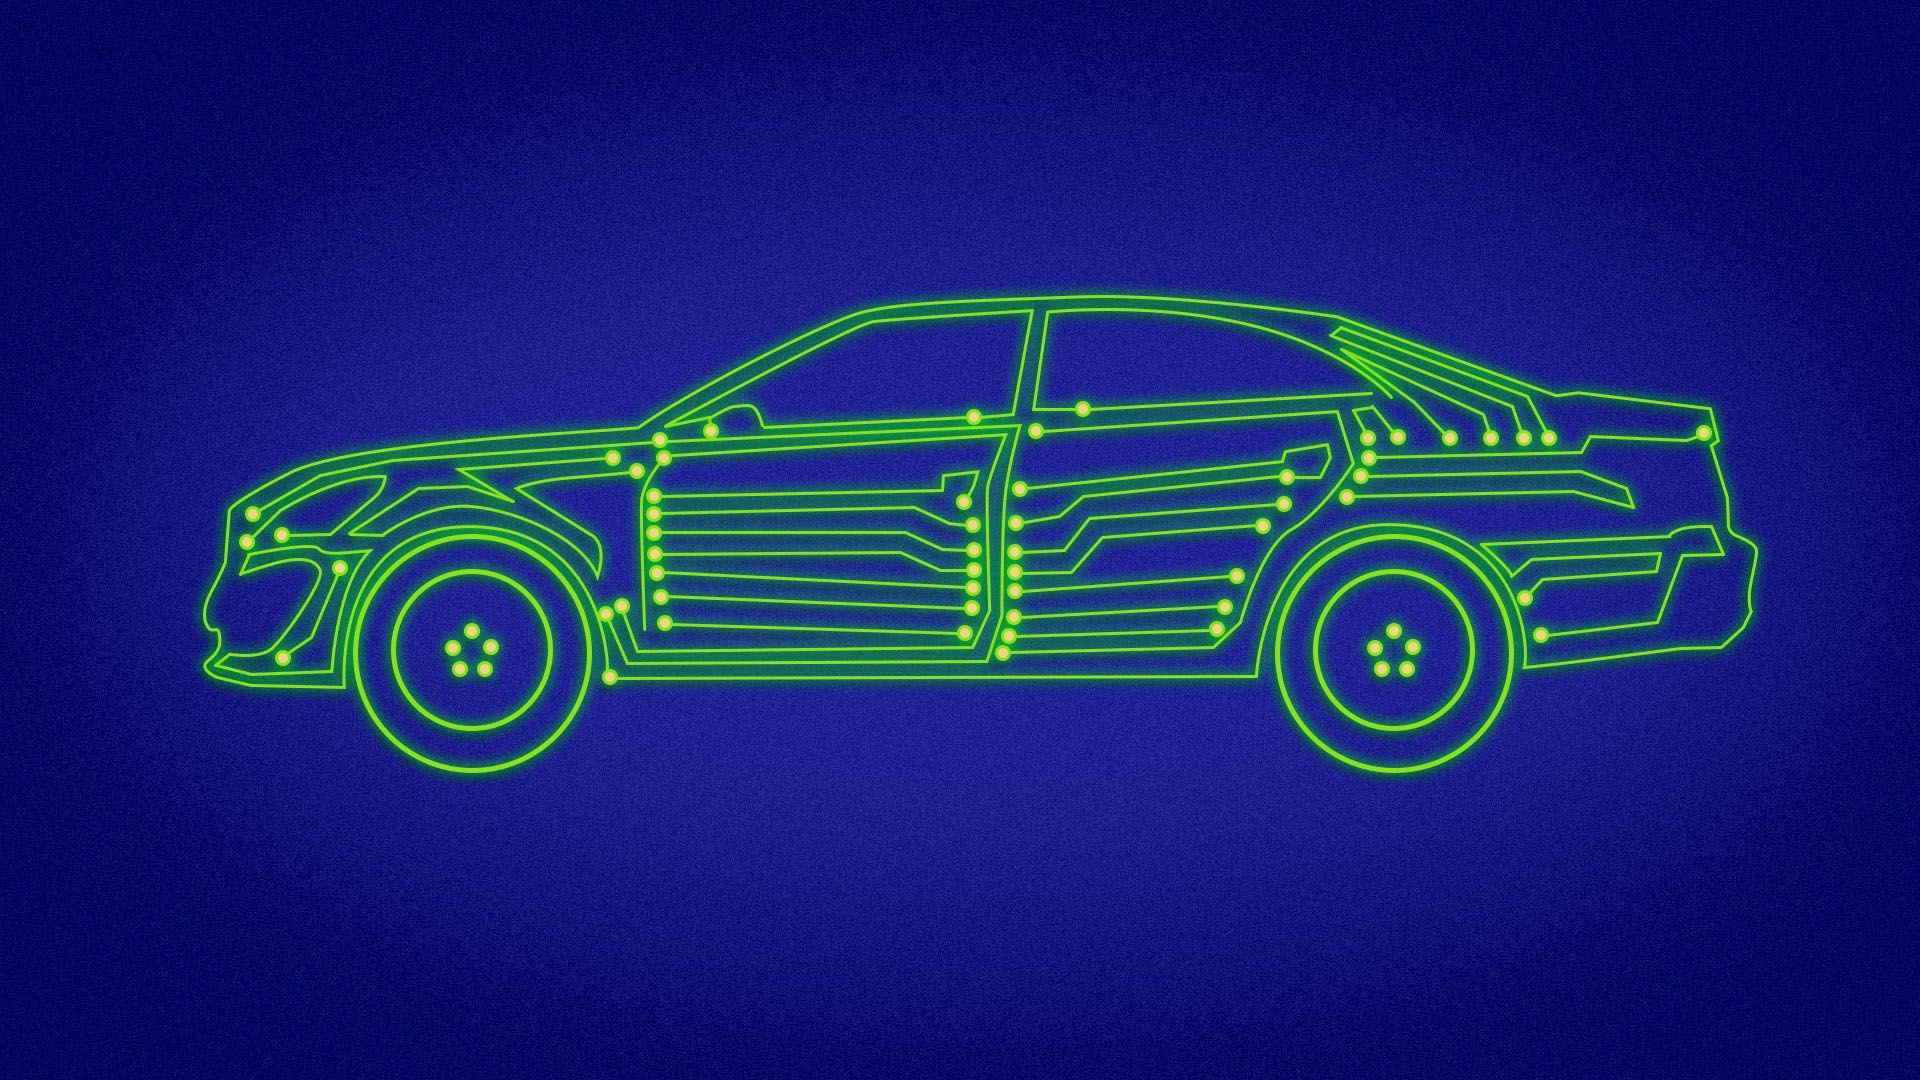 Illustration of a car made out of circuitry 